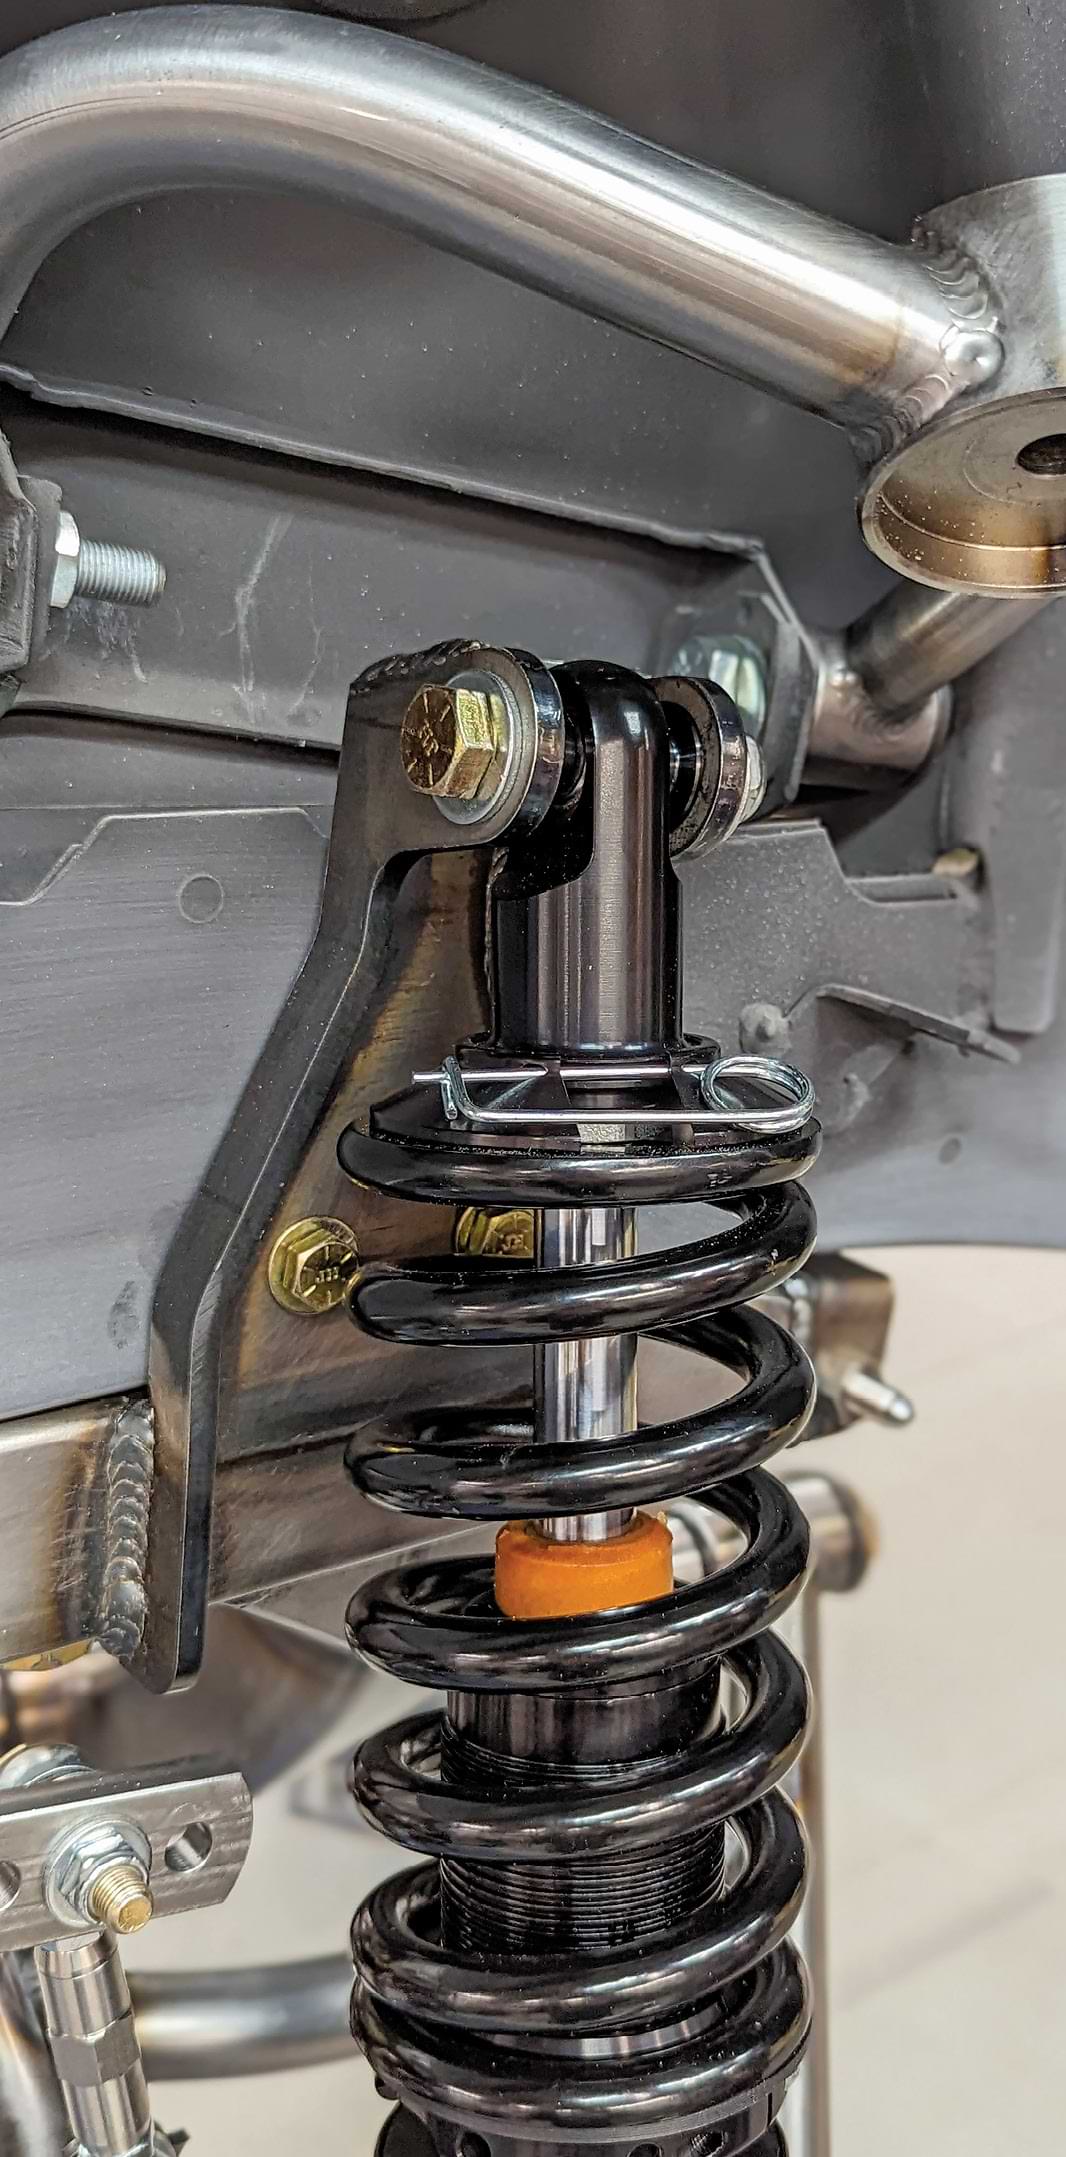 The Strange Engineering coilovers are installed using the supplied hardware. Spacers are used to properly position the coilover in the upper bracket.